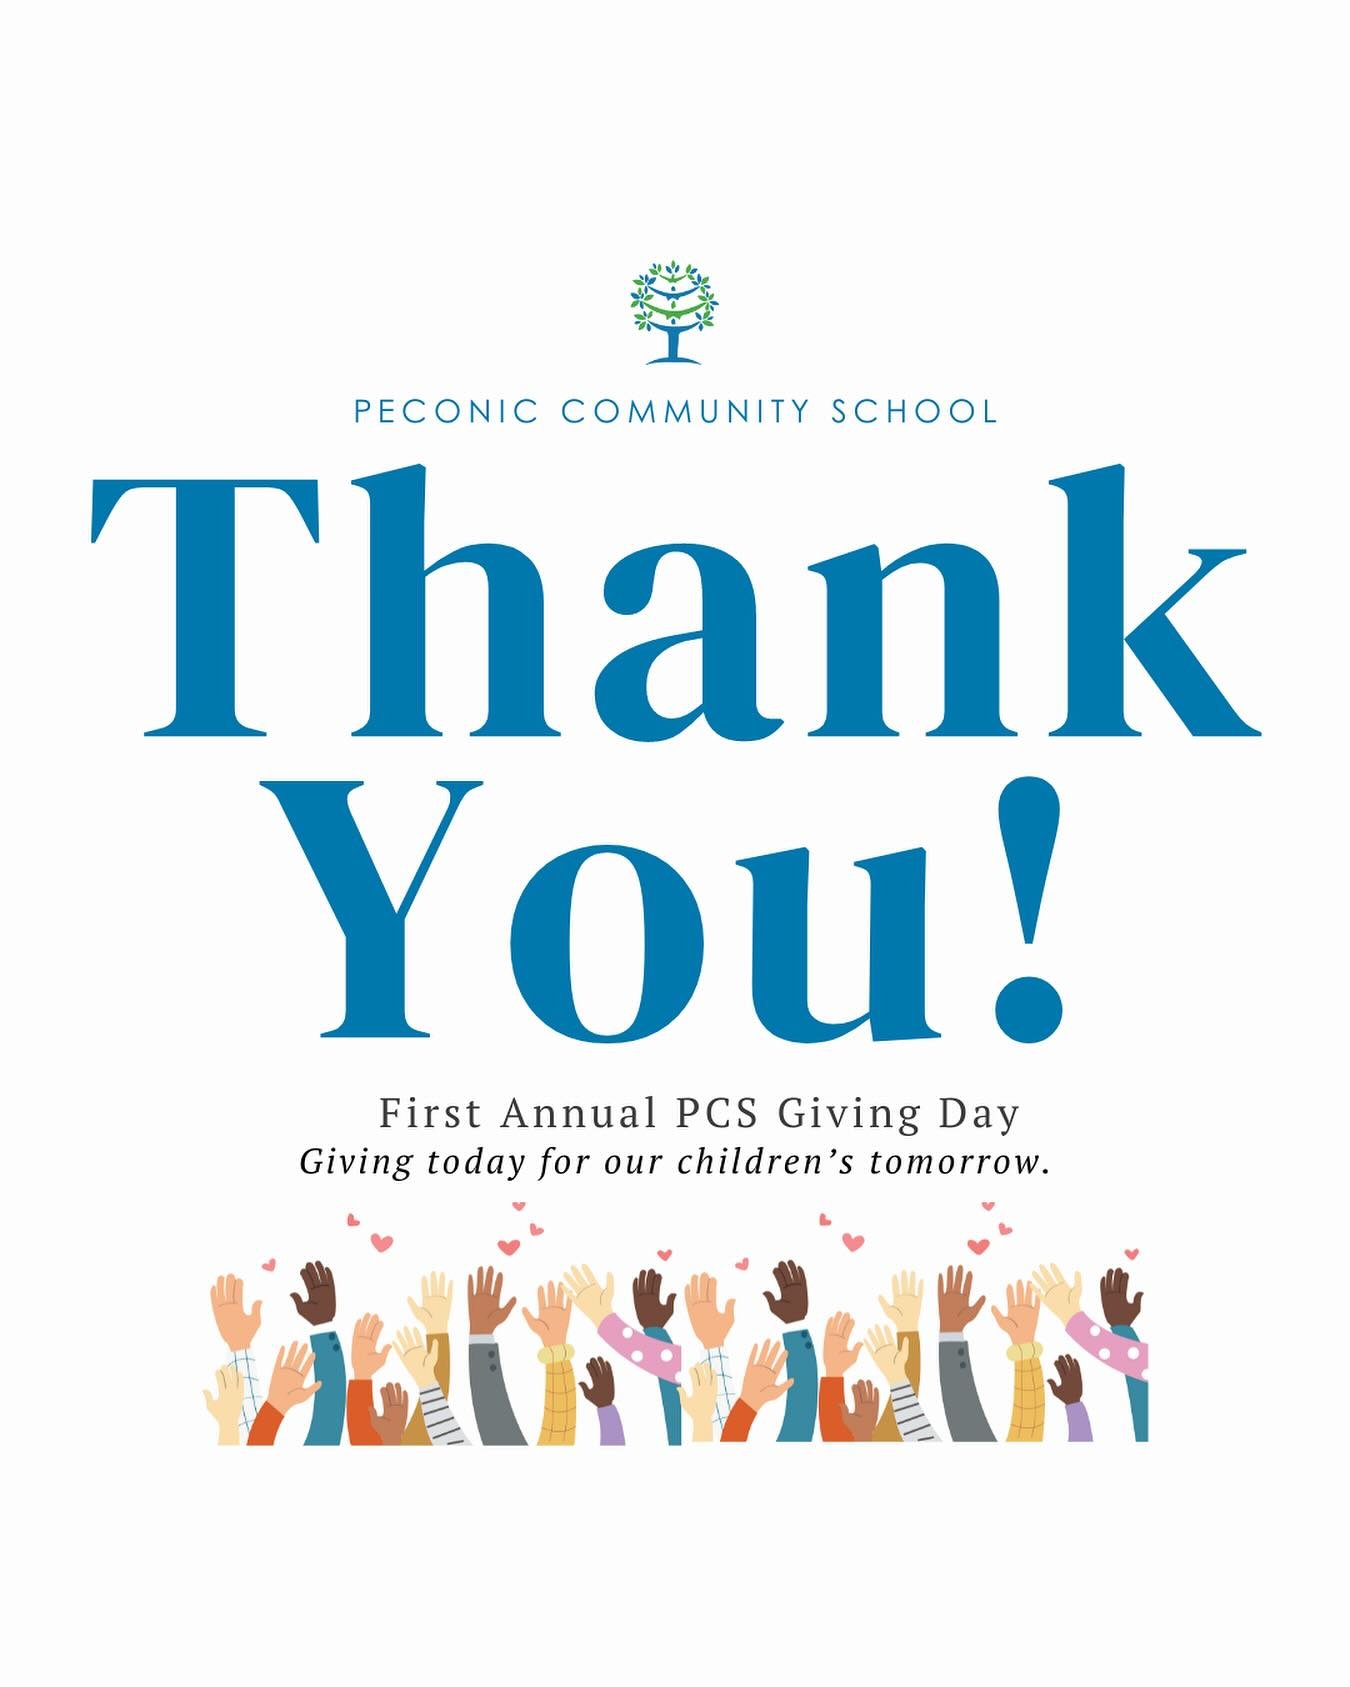 PCS Community!! THANK YOU!! ✨💫 Our first annual PCS Day of Giving was a tremendous success thanks to your enthusiastic support. We&rsquo;re thrilled to report that together, you made over 125(!!) gifts and raised nearly $15,000 for Peconic Community